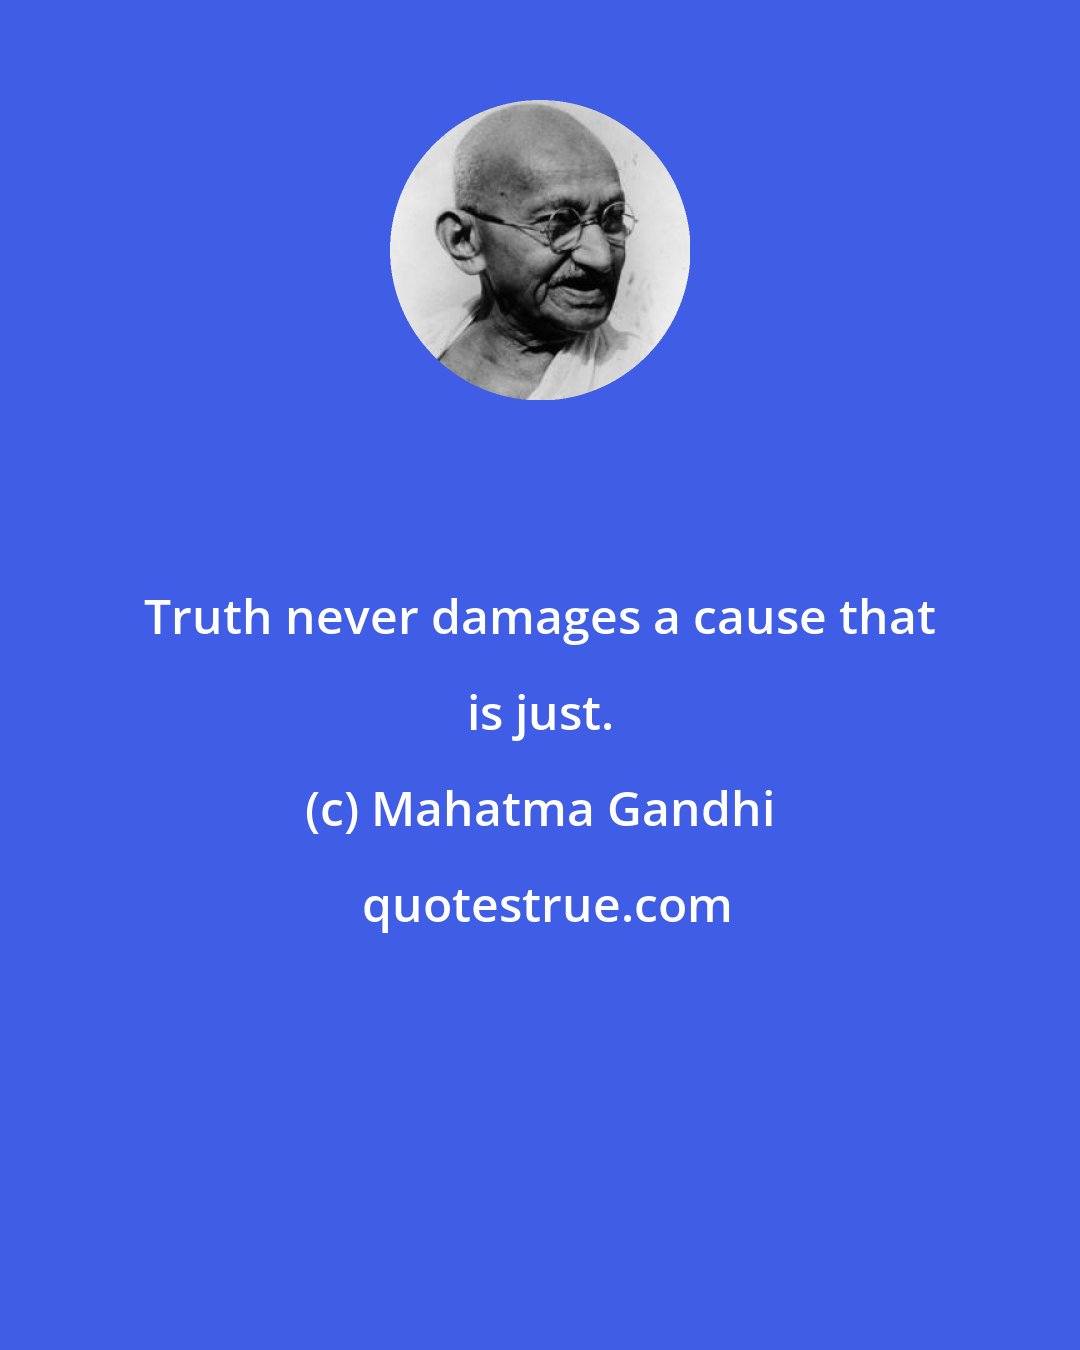 Mahatma Gandhi: Truth never damages a cause that is just.